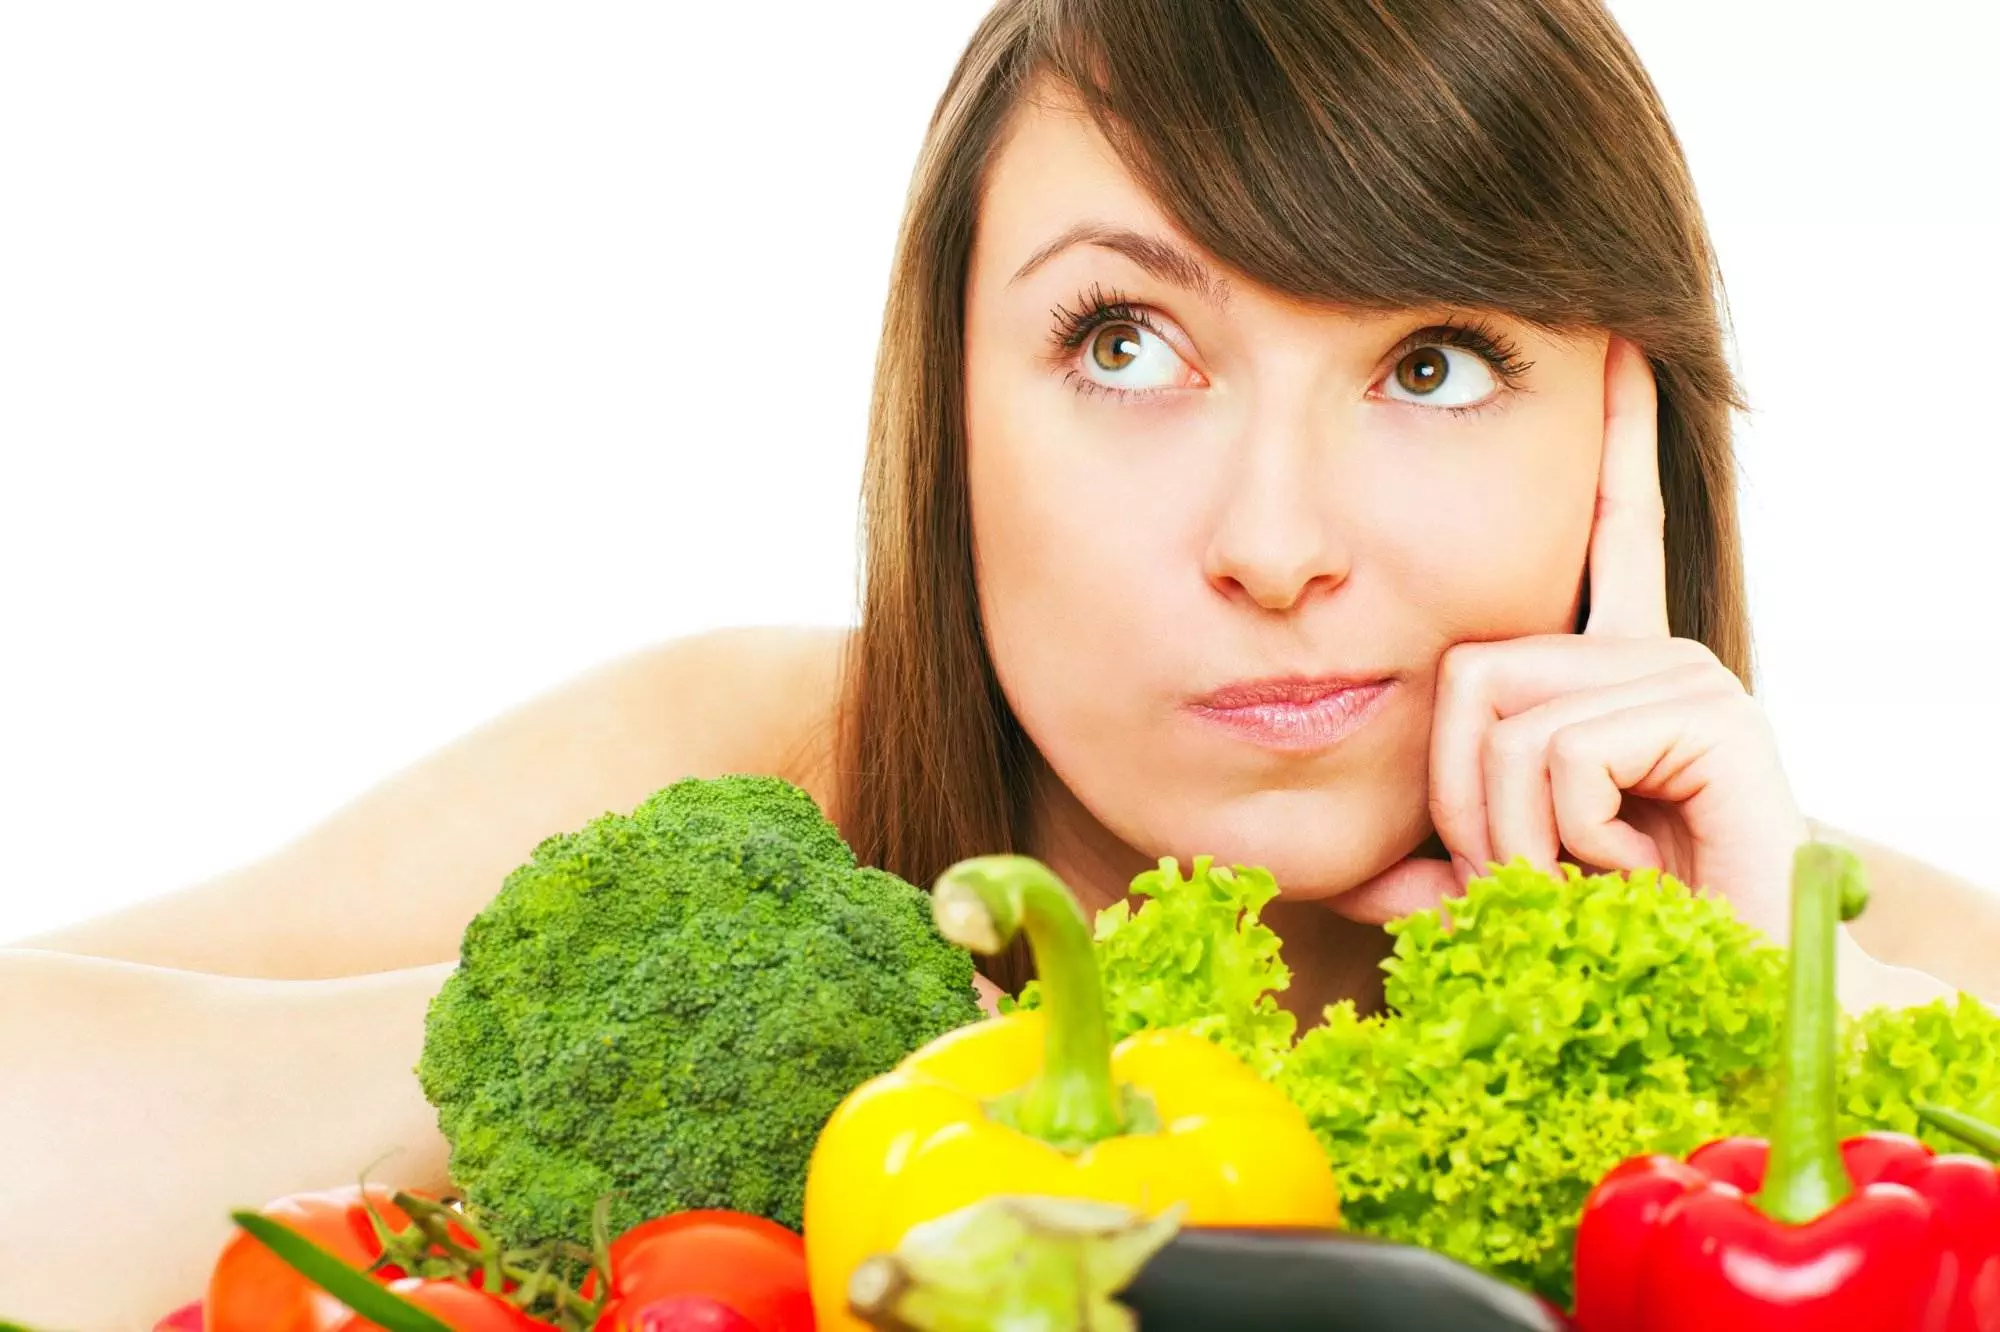 A picture of a young woman posing with vegetables over white background